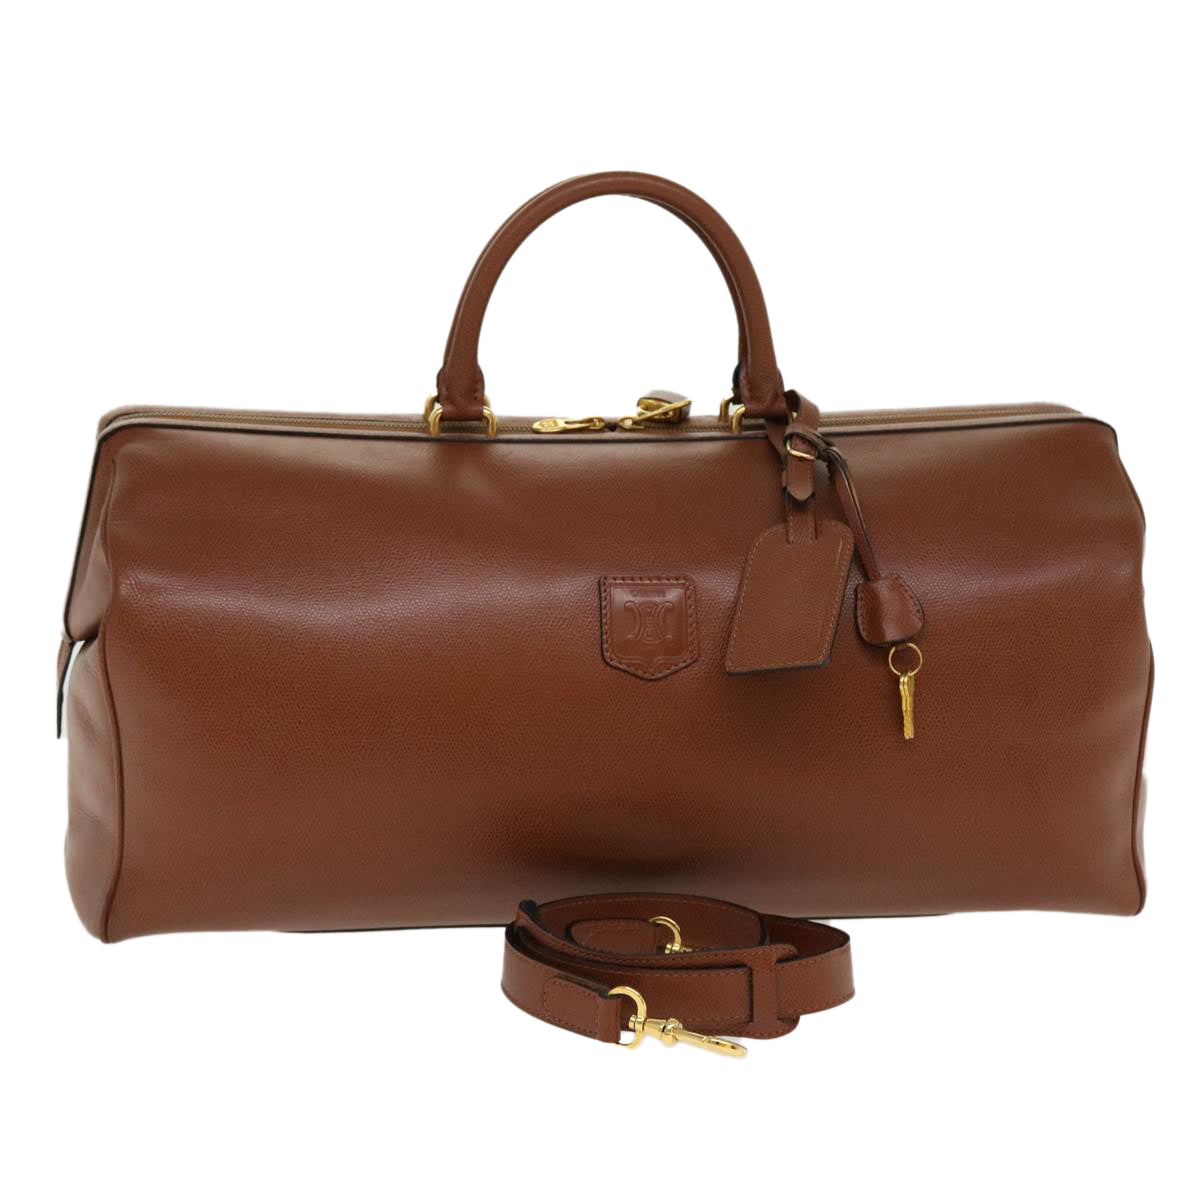 CELINE Boston Bag Leather 2way Brown Auth 37996